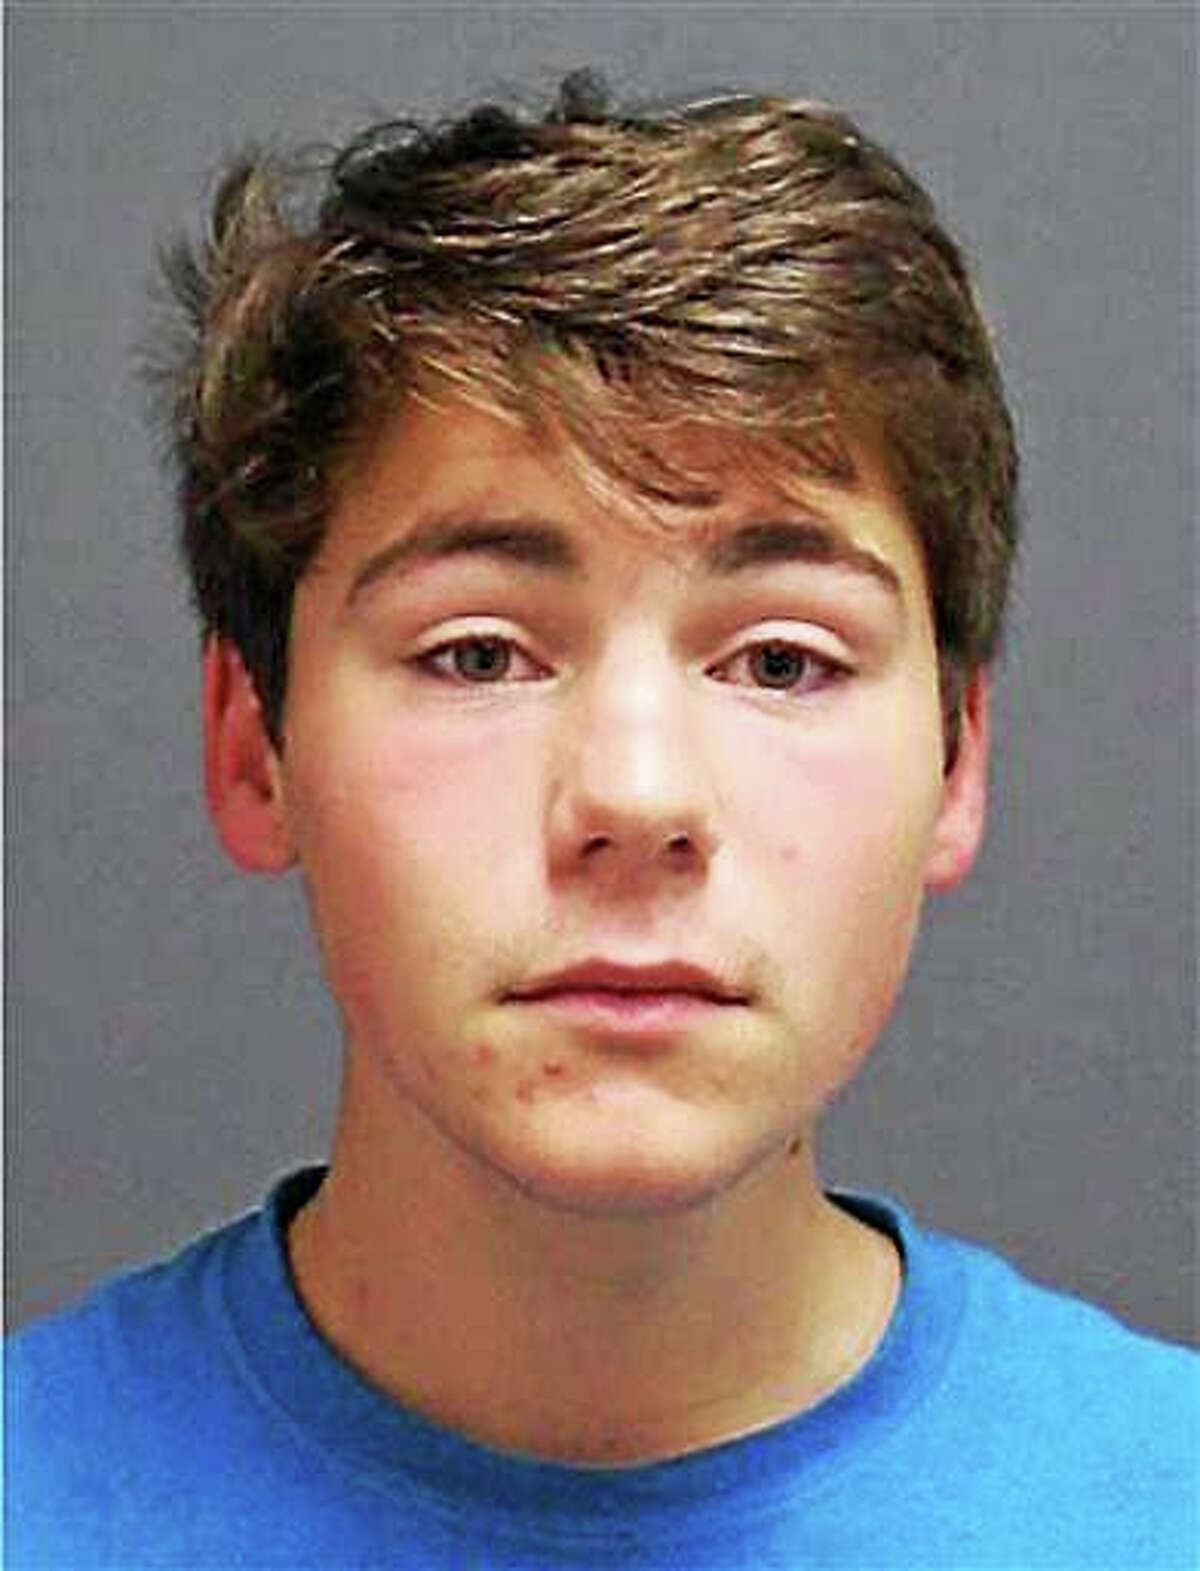 This undated file photo provided by the University of Connecticut police department shows student Luke Gatti, 19, of Bayville, N.Y.